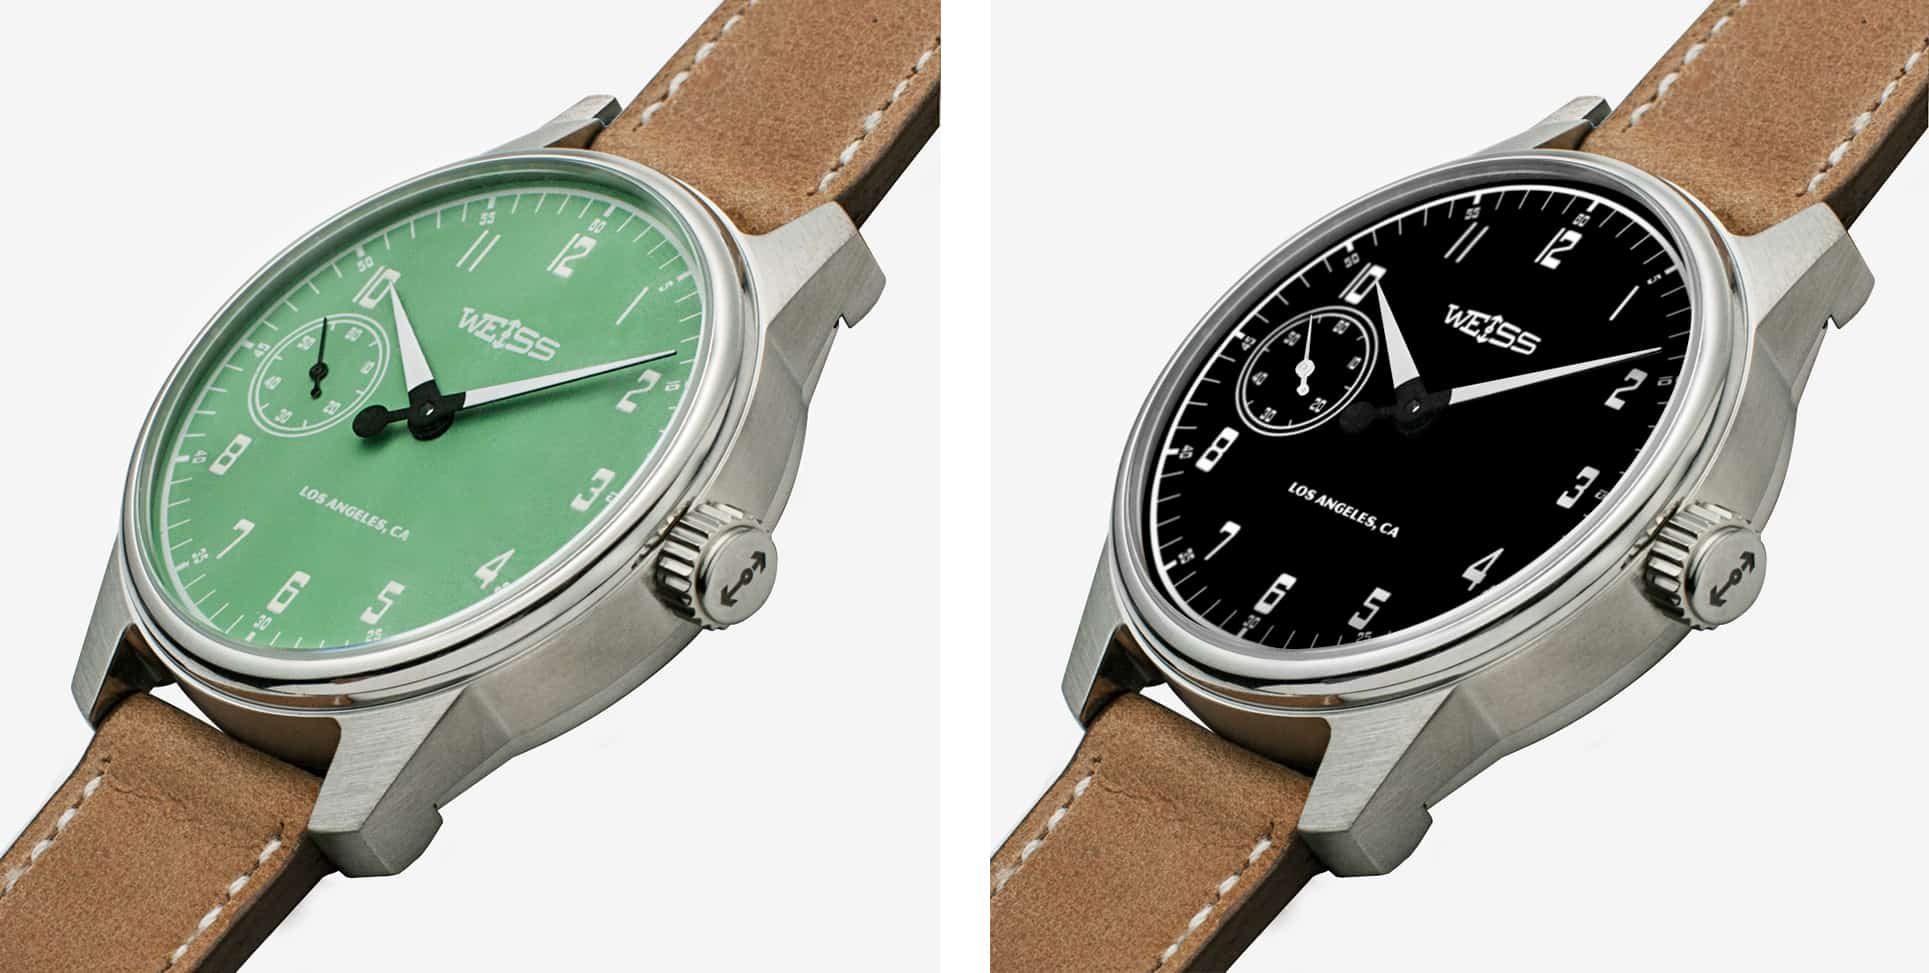 Introducing the Limited Edition Gauge Series from Weiss Watch Company